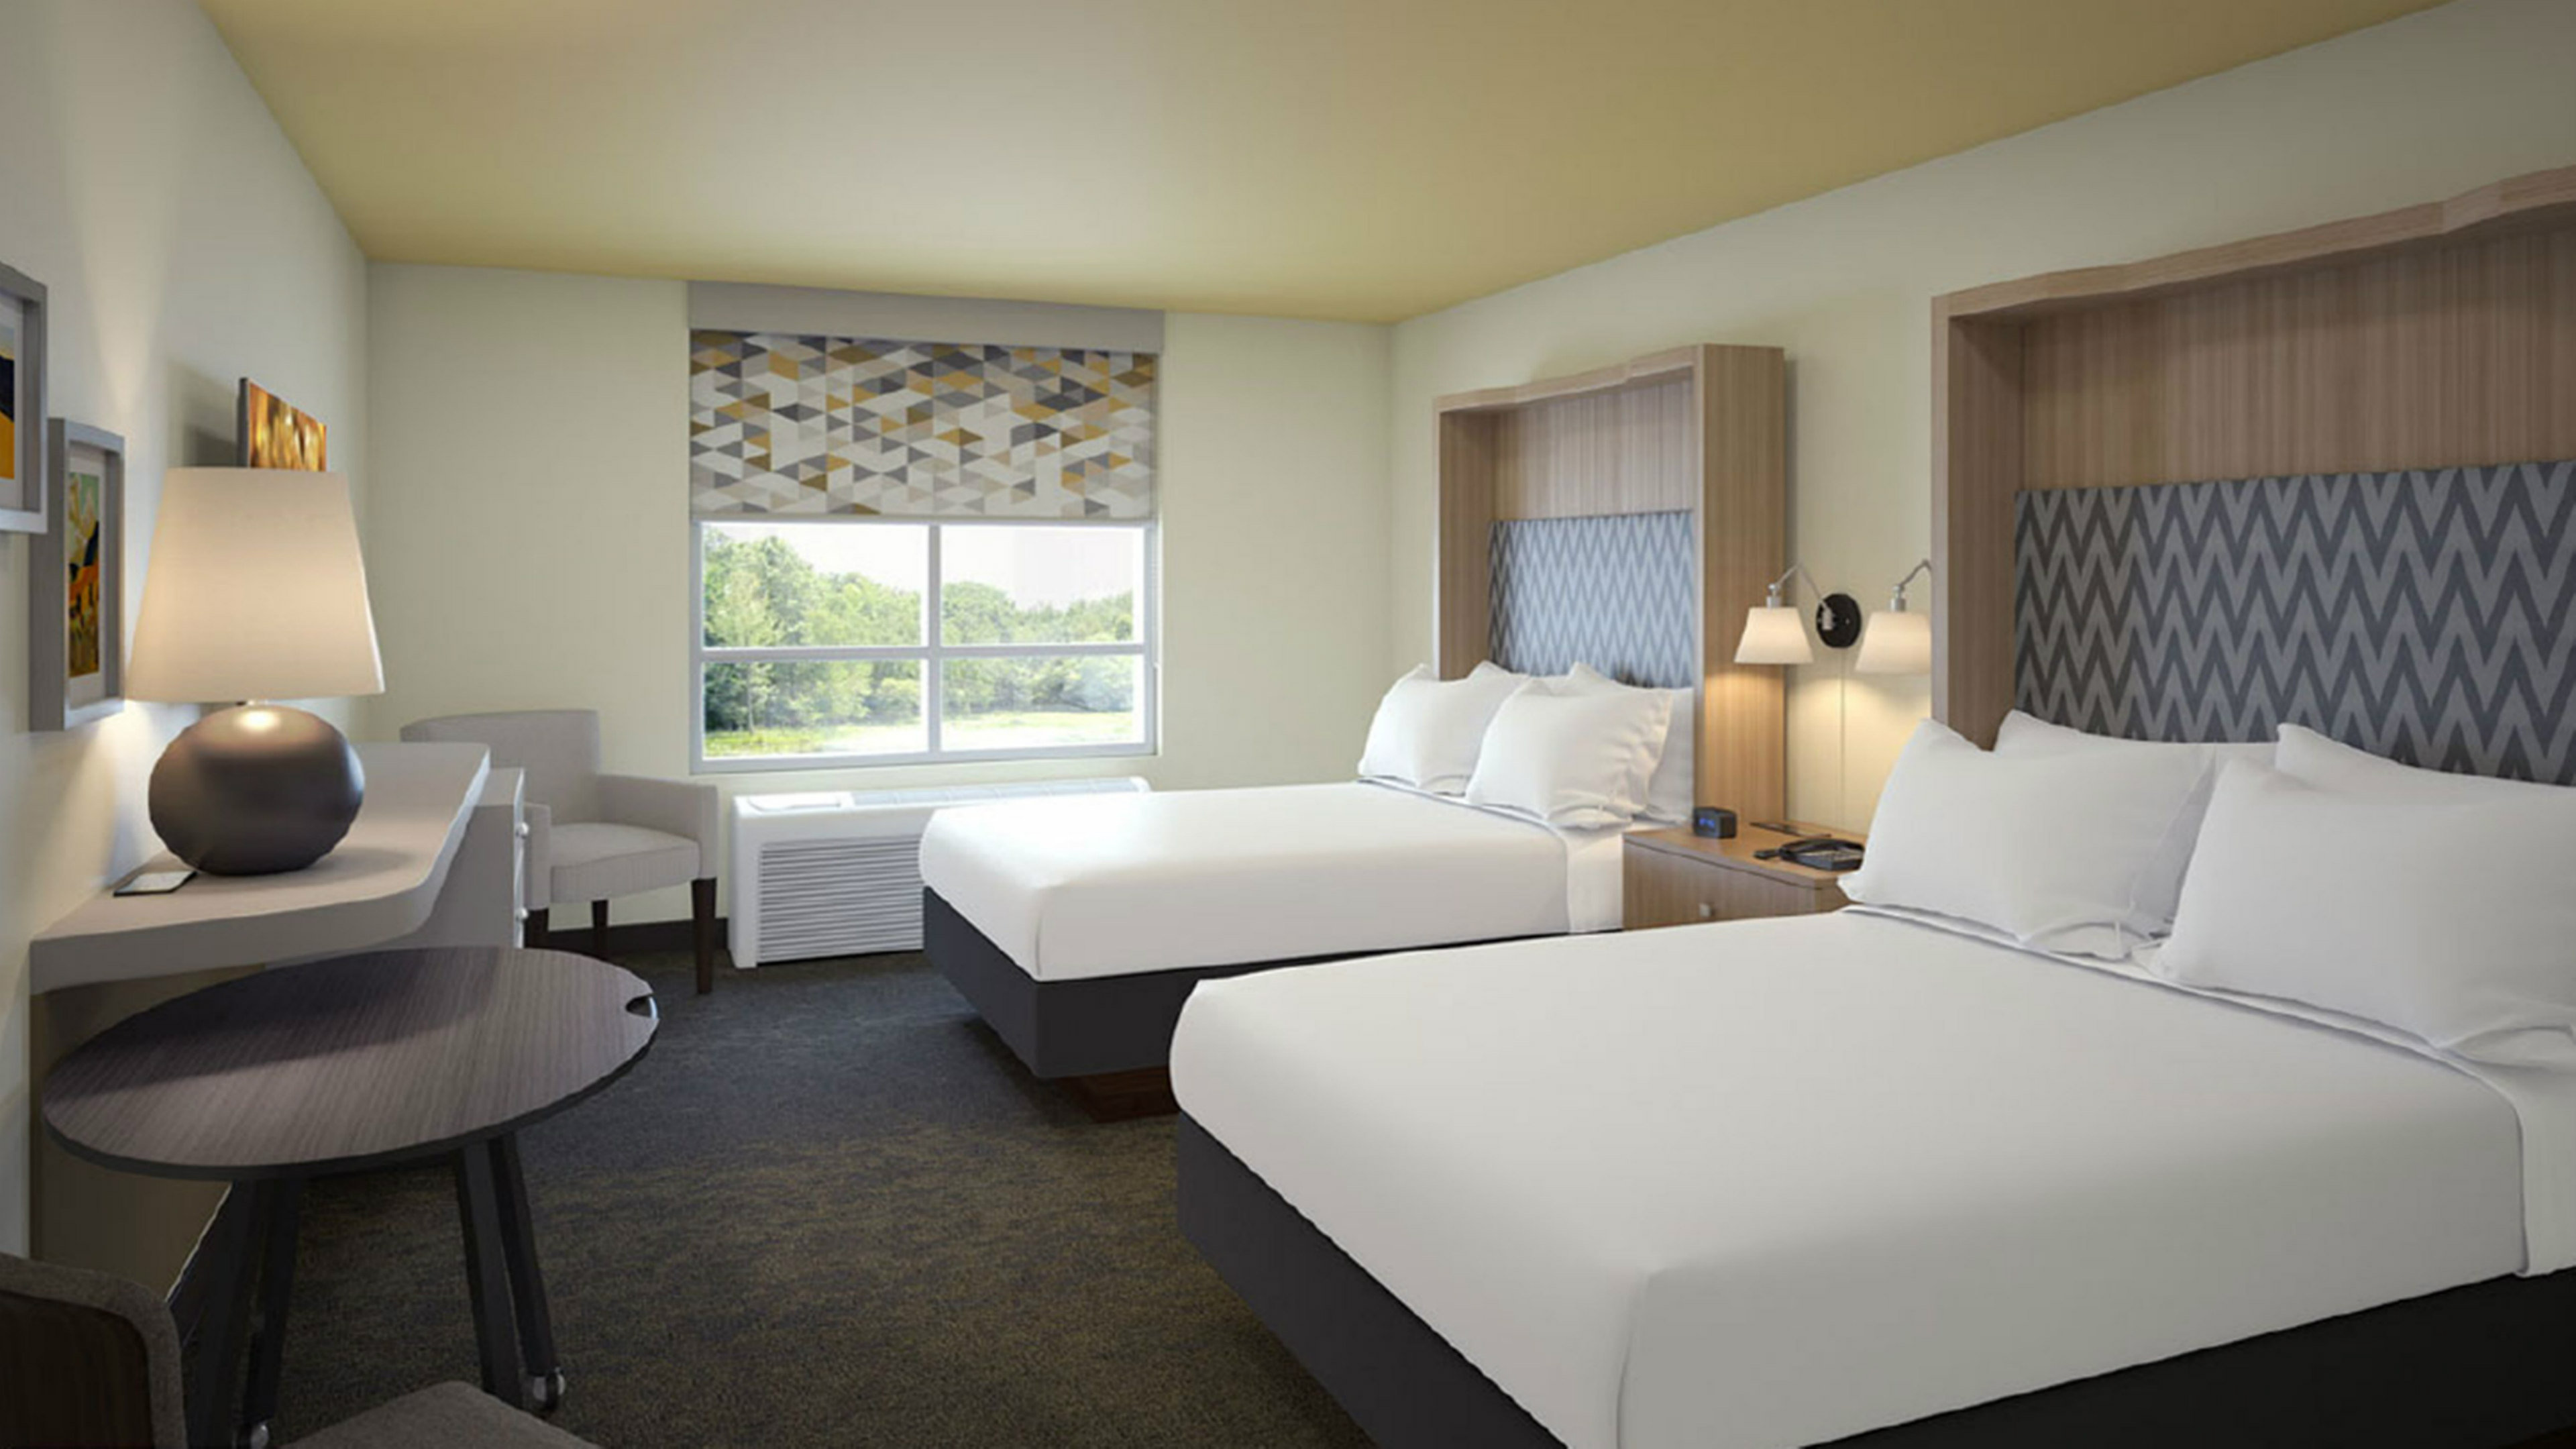 Our double queen rooms are great for sports teams and families!